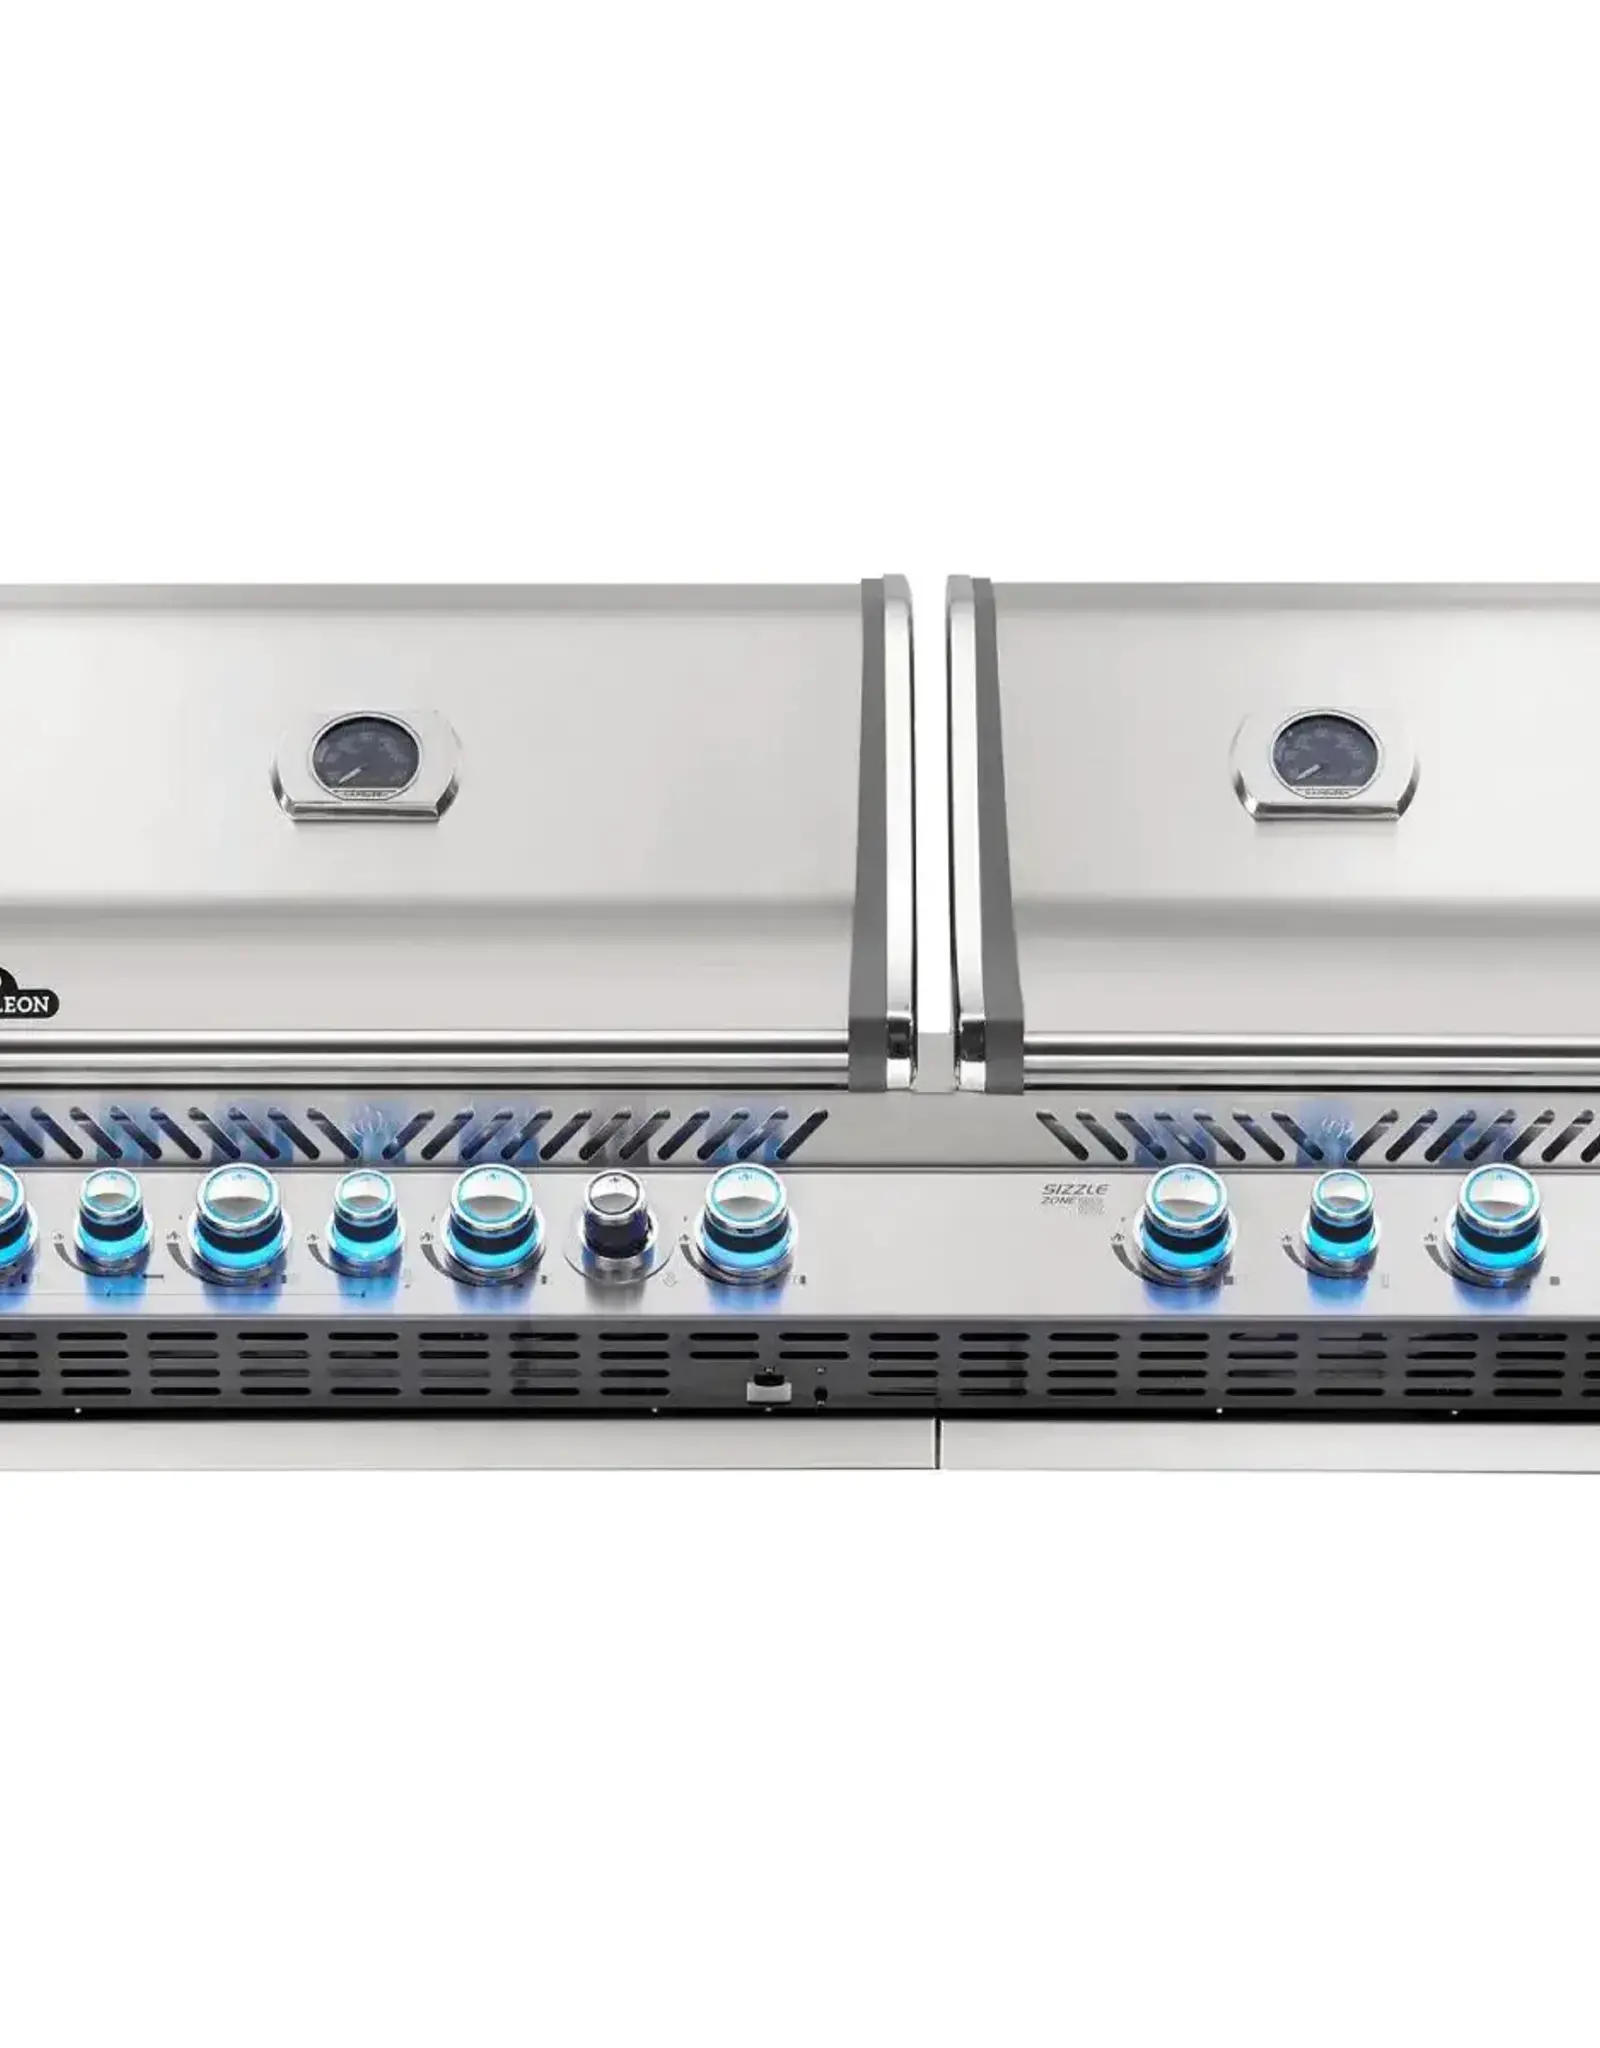 Napoleon Napoleon Prestige PRO 825 Built-In Natural Gas Grill with Infrared Rear Burner and Infrared Sear Burners and Rotisserie Kit - BIPRO825RBINSS-3